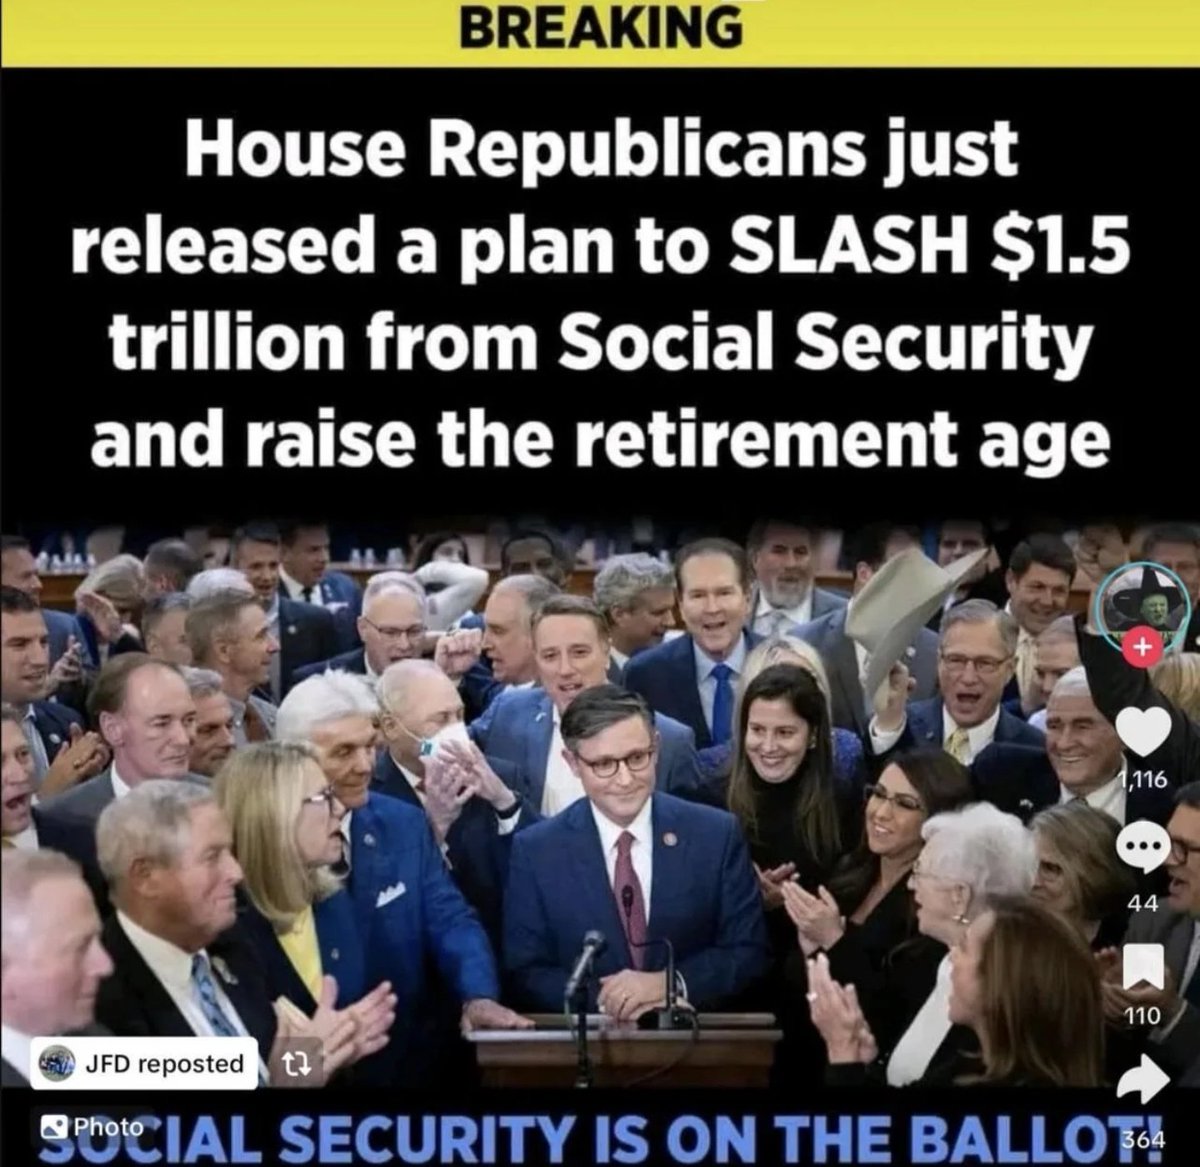 PRO TIP: If you're planning to slash social security AND raise the retirement age so that we have to work until we die, just so that billionaires can buy more yachts... YOU ARE THE FUCKING VILLAIN.